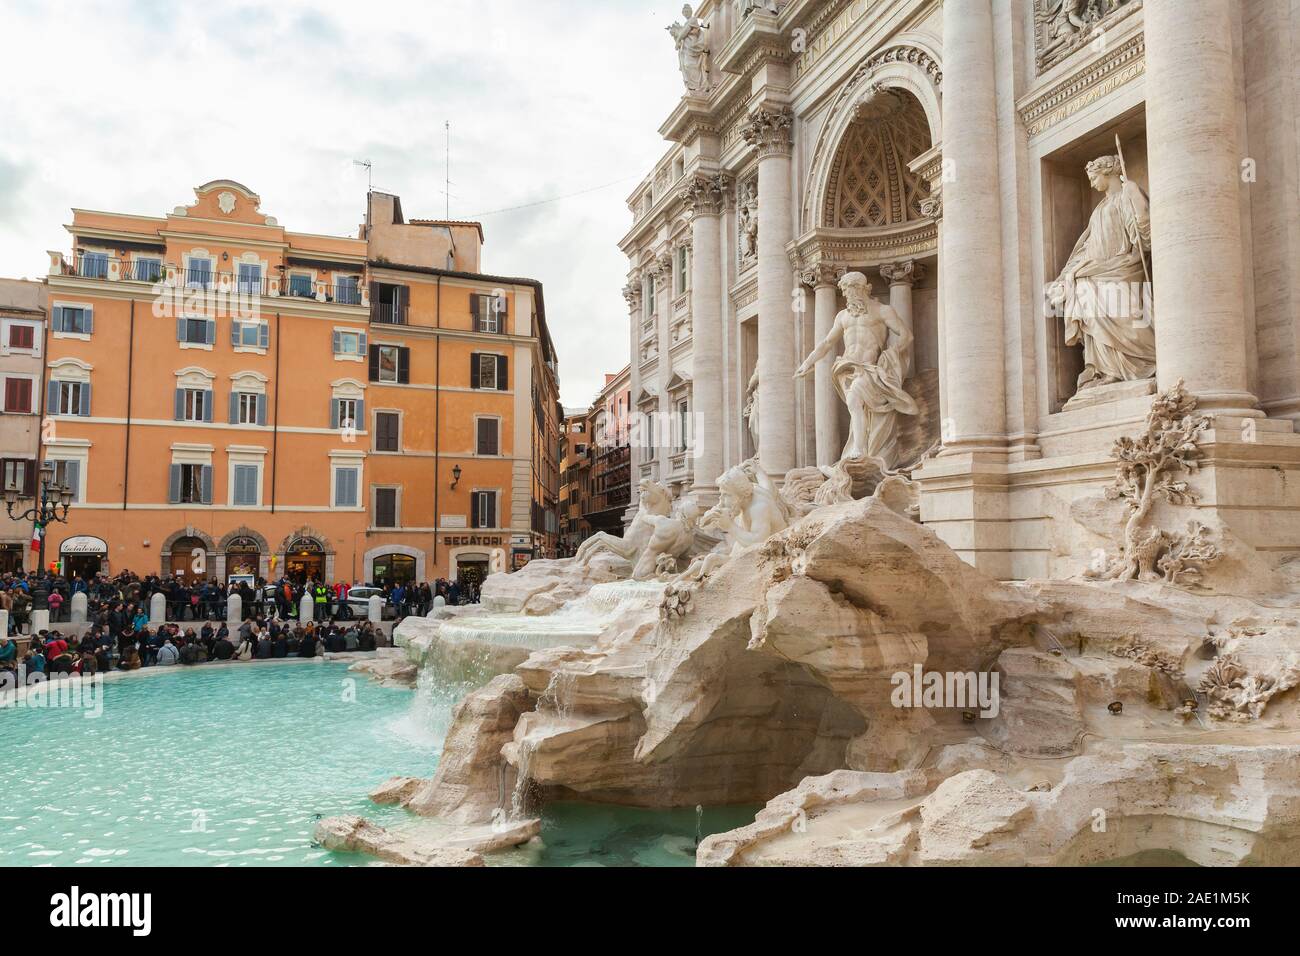 Rome, Italy - February 13, 2016: Tourists are near the Trevi Fountain. It is one of the most popular tourist attractions in Rome Stock Photo